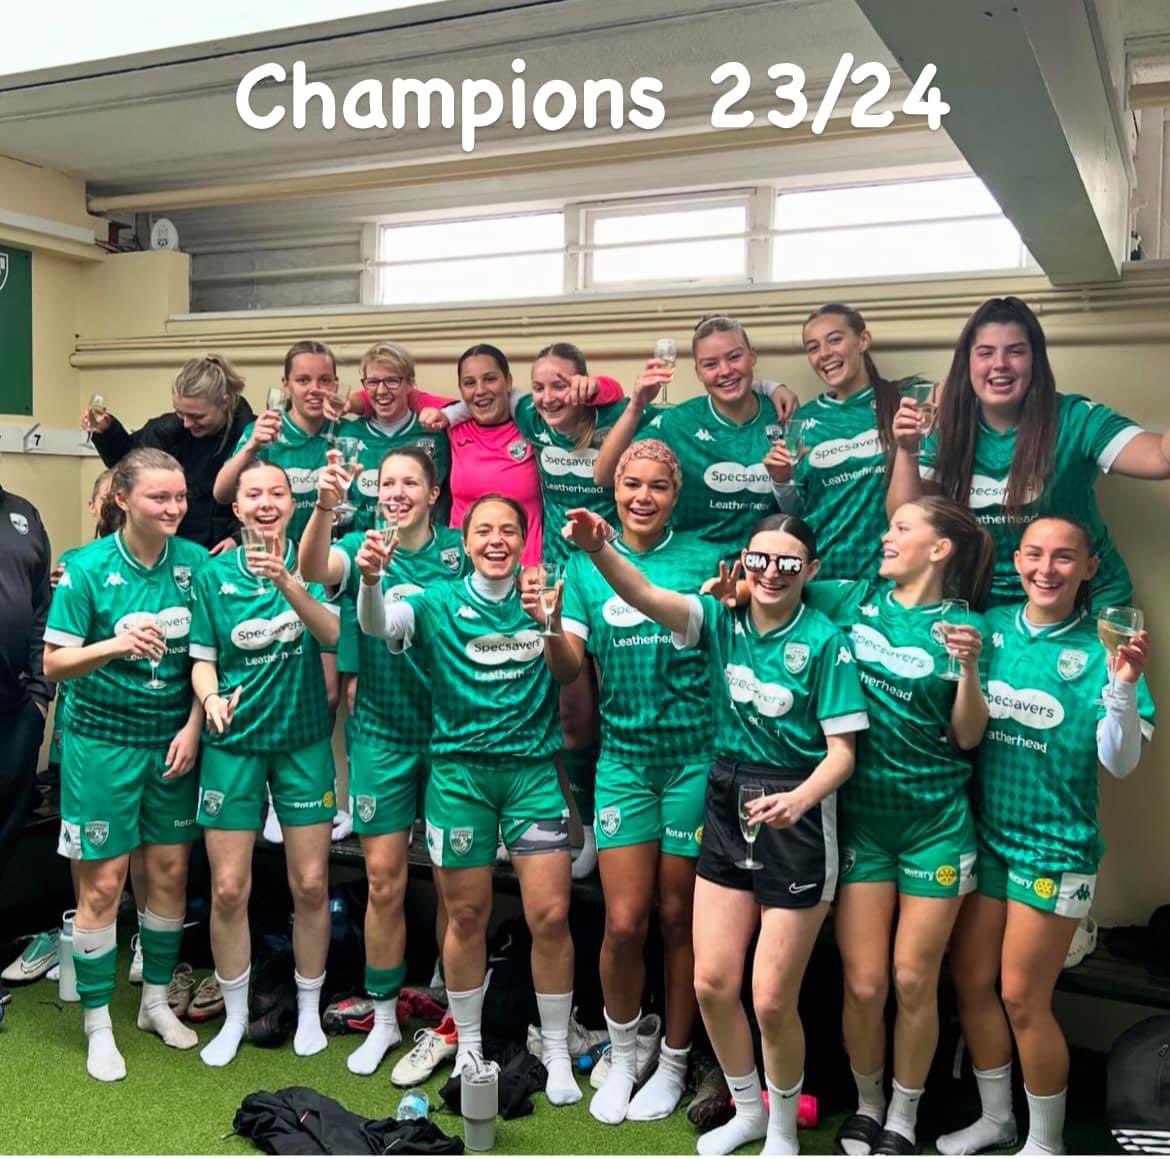 Congratulations to @leatherheadwfc who were today crowned champions 👏👏👏👏